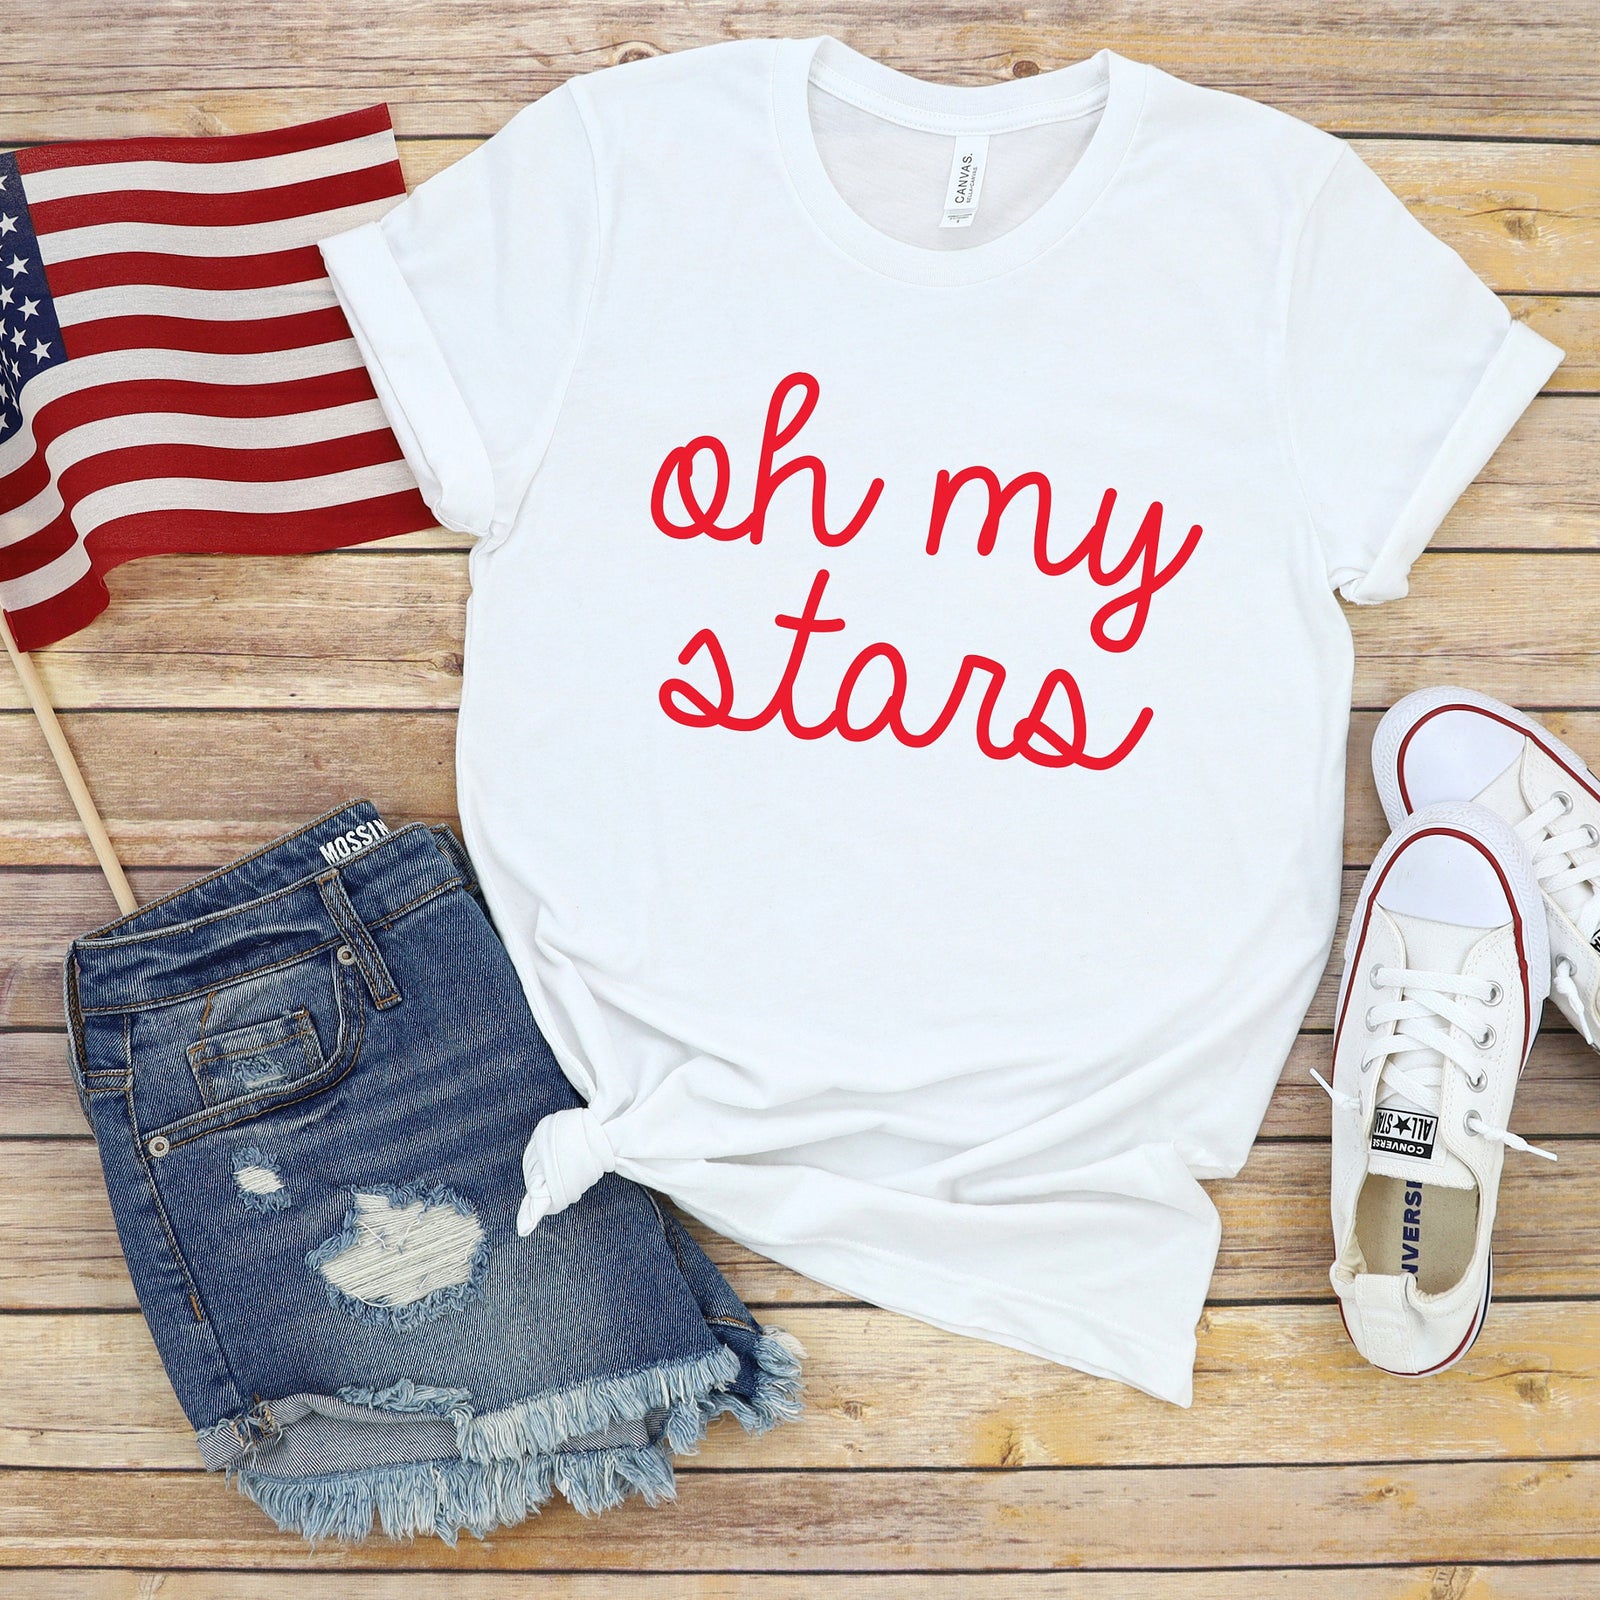 Oh My Stars Fourth of July Adult T Shirt - Independence Day - Memorial - Red White and Blue USA